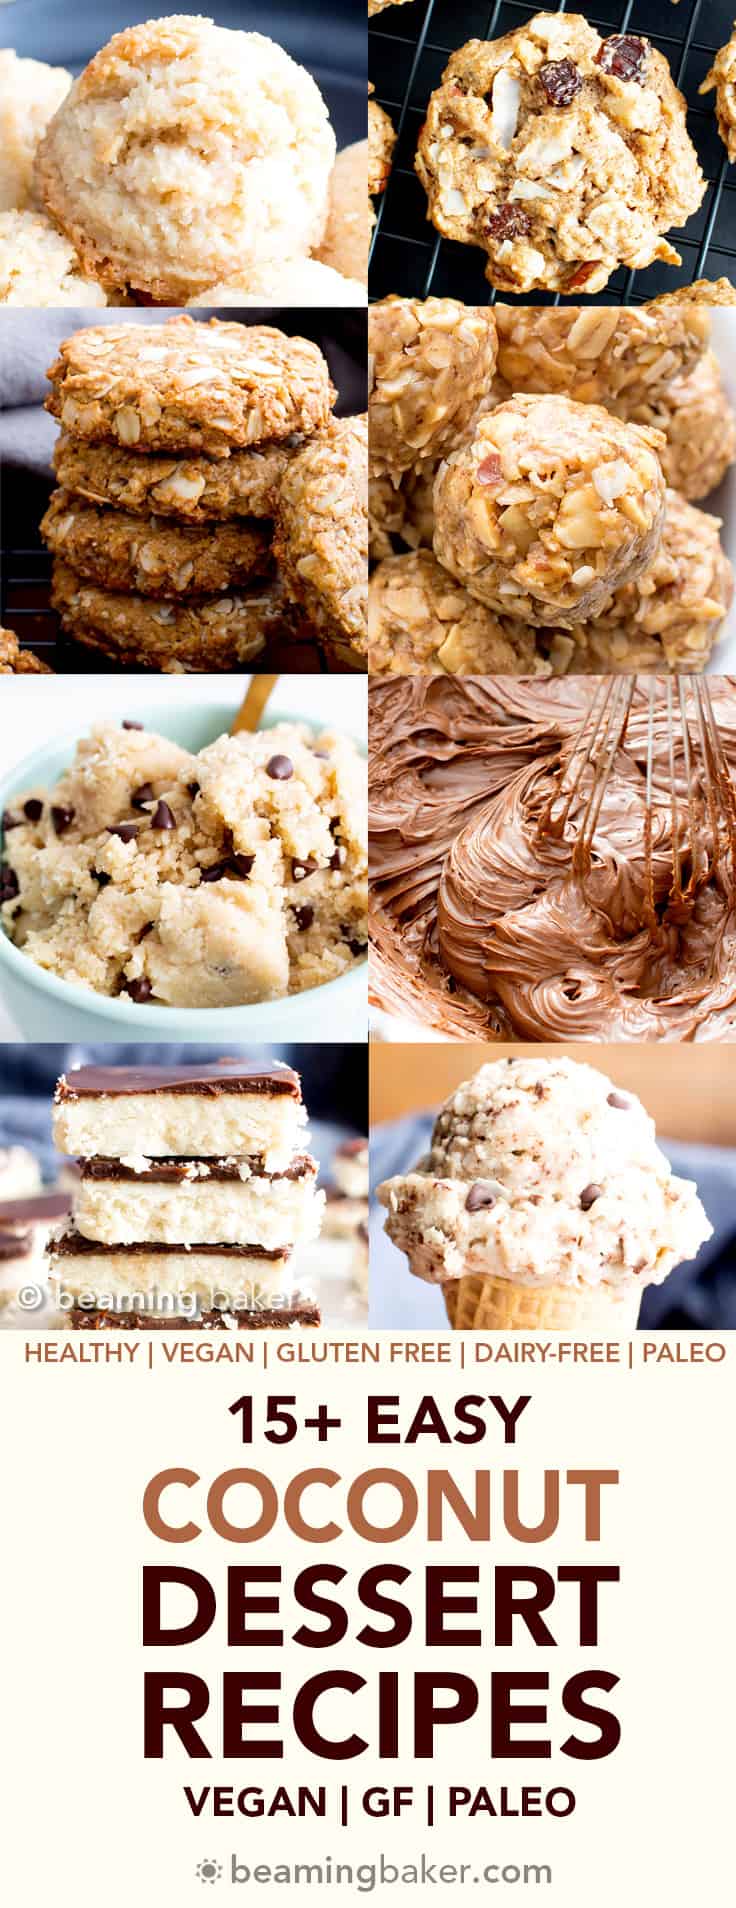 15+ Easy Vegan Gluten Free Coconut Dessert Recipes (V, GF): a tasty collection of dairy-free paleo coconut dessert recipes—GF & healthy! Including: coconut cookies, recipes made with coconut flour, coconut milk, coconut cream and more! #Vegan #GlutenFree #DairyFree #Paleo #Coconut #Dessert | Recipes at BeamingBaker.com